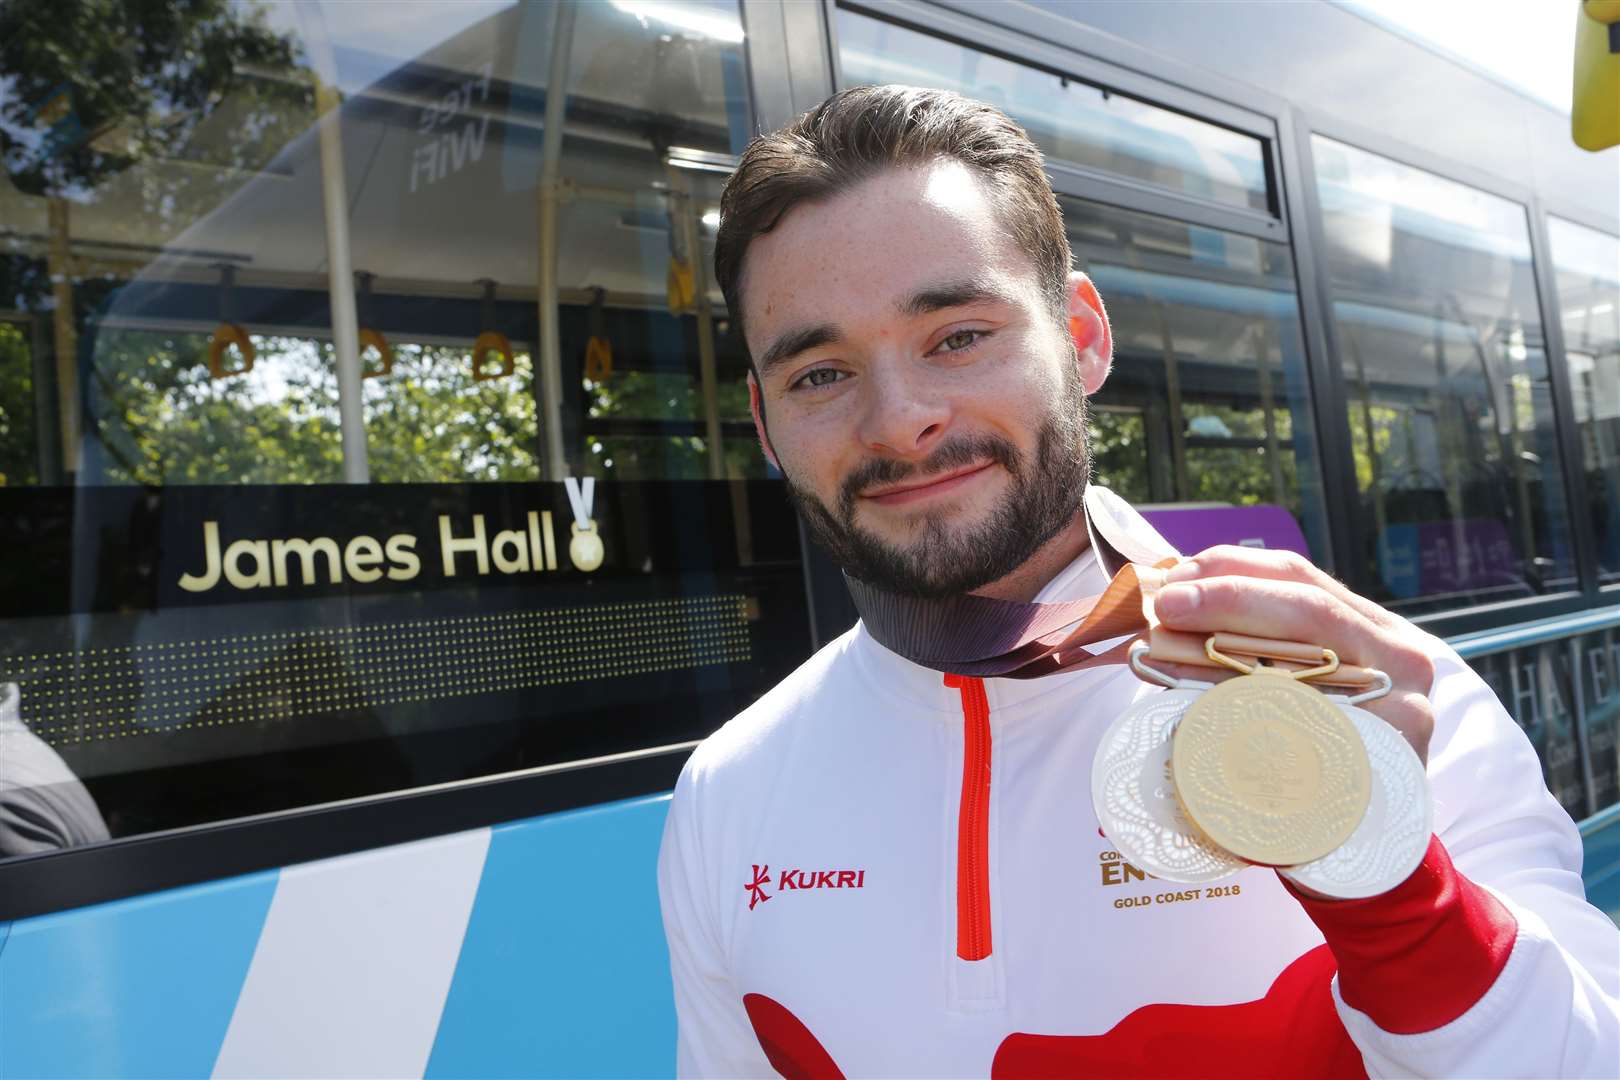 Maidstone gymnast James Hall even has a bus named after him in his home town